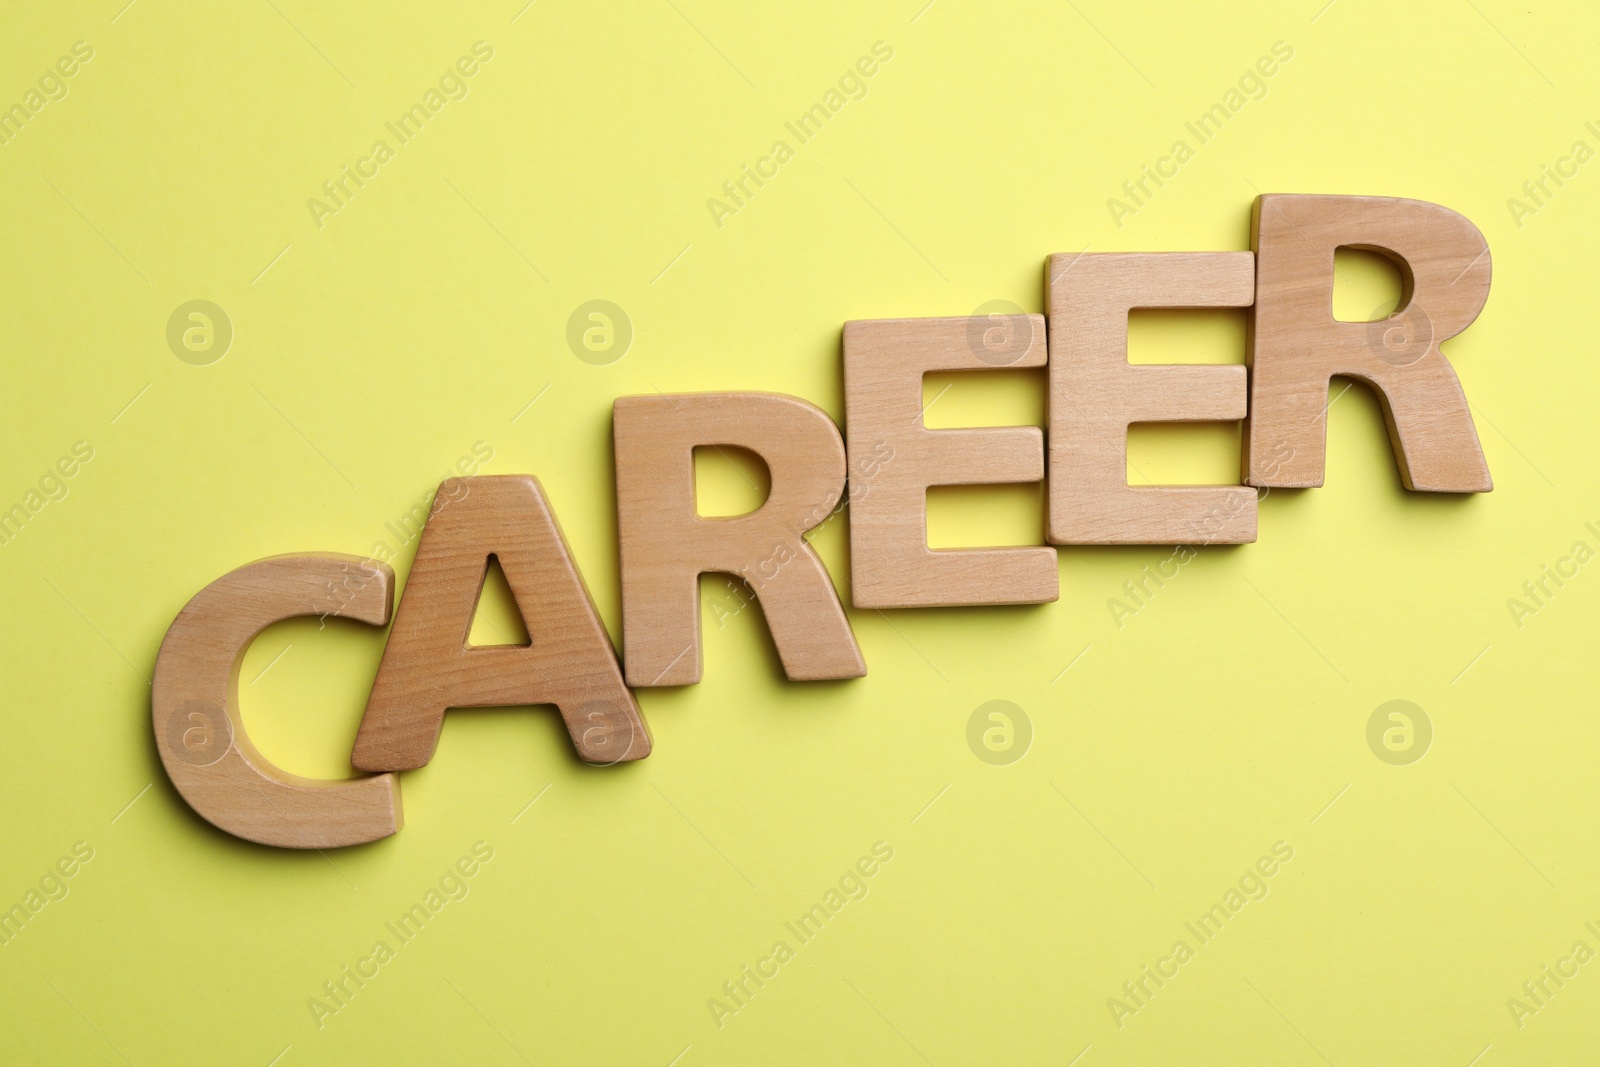 Photo of Word CAREER made with wooden letters on yellow background, flat lay